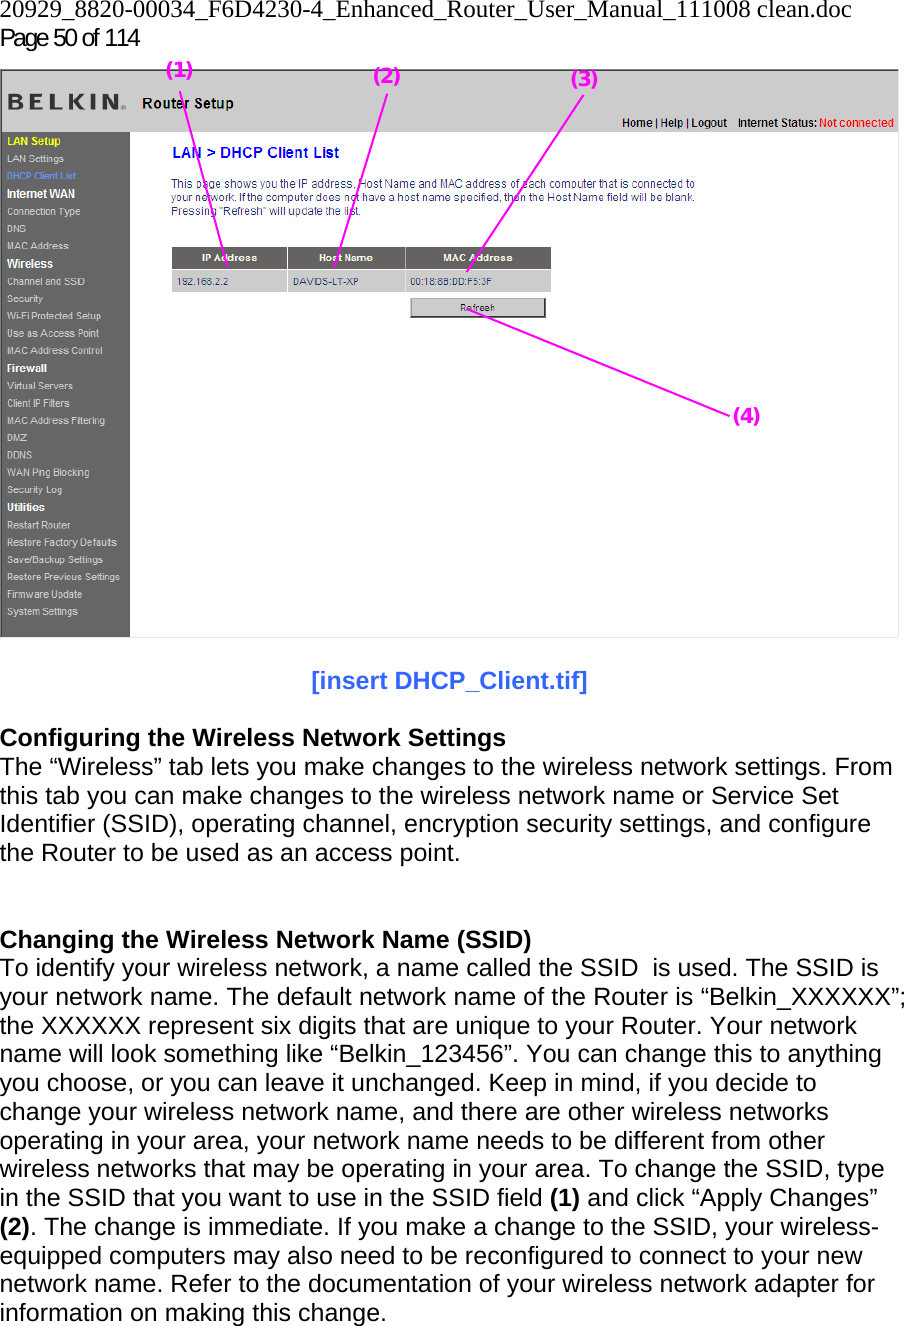 20929_8820-00034_F6D4230-4_Enhanced_Router_User_Manual_111008 clean.doc  Page 50 of 114   [insert DHCP_Client.tif]  Configuring the Wireless Network Settings The “Wireless” tab lets you make changes to the wireless network settings. From this tab you can make changes to the wireless network name or Service Set Identifier (SSID), operating channel, encryption security settings, and configure the Router to be used as an access point.   Changing the Wireless Network Name (SSID) To identify your wireless network, a name called the SSID  is used. The SSID is your network name. The default network name of the Router is “Belkin_XXXXXX”; the XXXXXX represent six digits that are unique to your Router. Your network name will look something like “Belkin_123456”. You can change this to anything you choose, or you can leave it unchanged. Keep in mind, if you decide to change your wireless network name, and there are other wireless networks operating in your area, your network name needs to be different from other wireless networks that may be operating in your area. To change the SSID, type in the SSID that you want to use in the SSID field (1) and click “Apply Changes” (2). The change is immediate. If you make a change to the SSID, your wireless-equipped computers may also need to be reconfigured to connect to your new network name. Refer to the documentation of your wireless network adapter for information on making this change. (2) (3)(4) (1) 